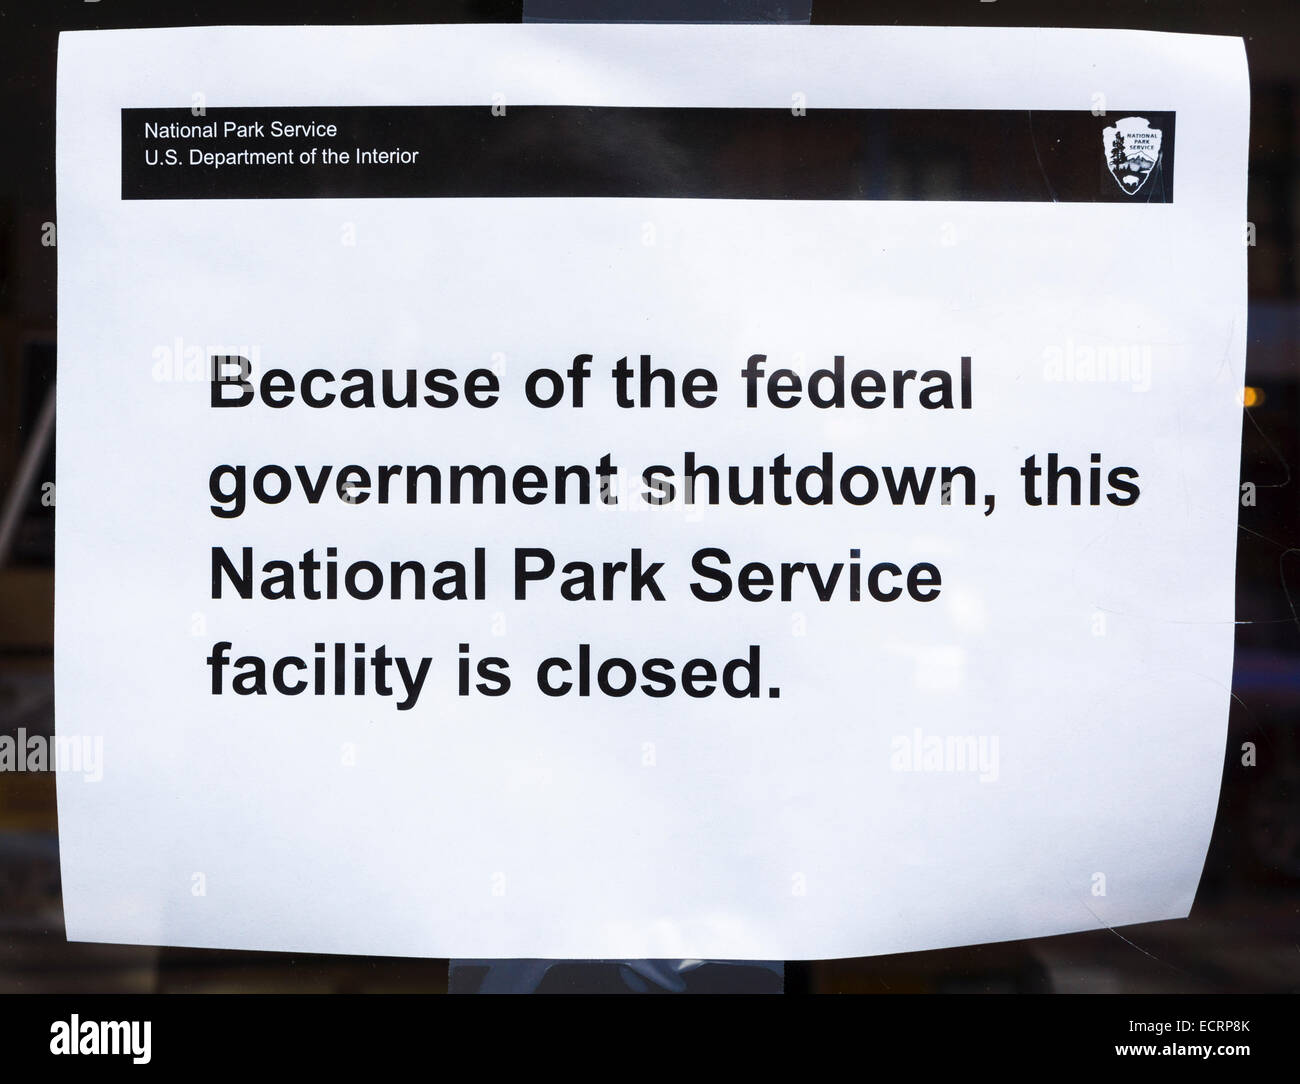 National Park Service facility closed. US federal government shutdown October 2012. Stock Photo